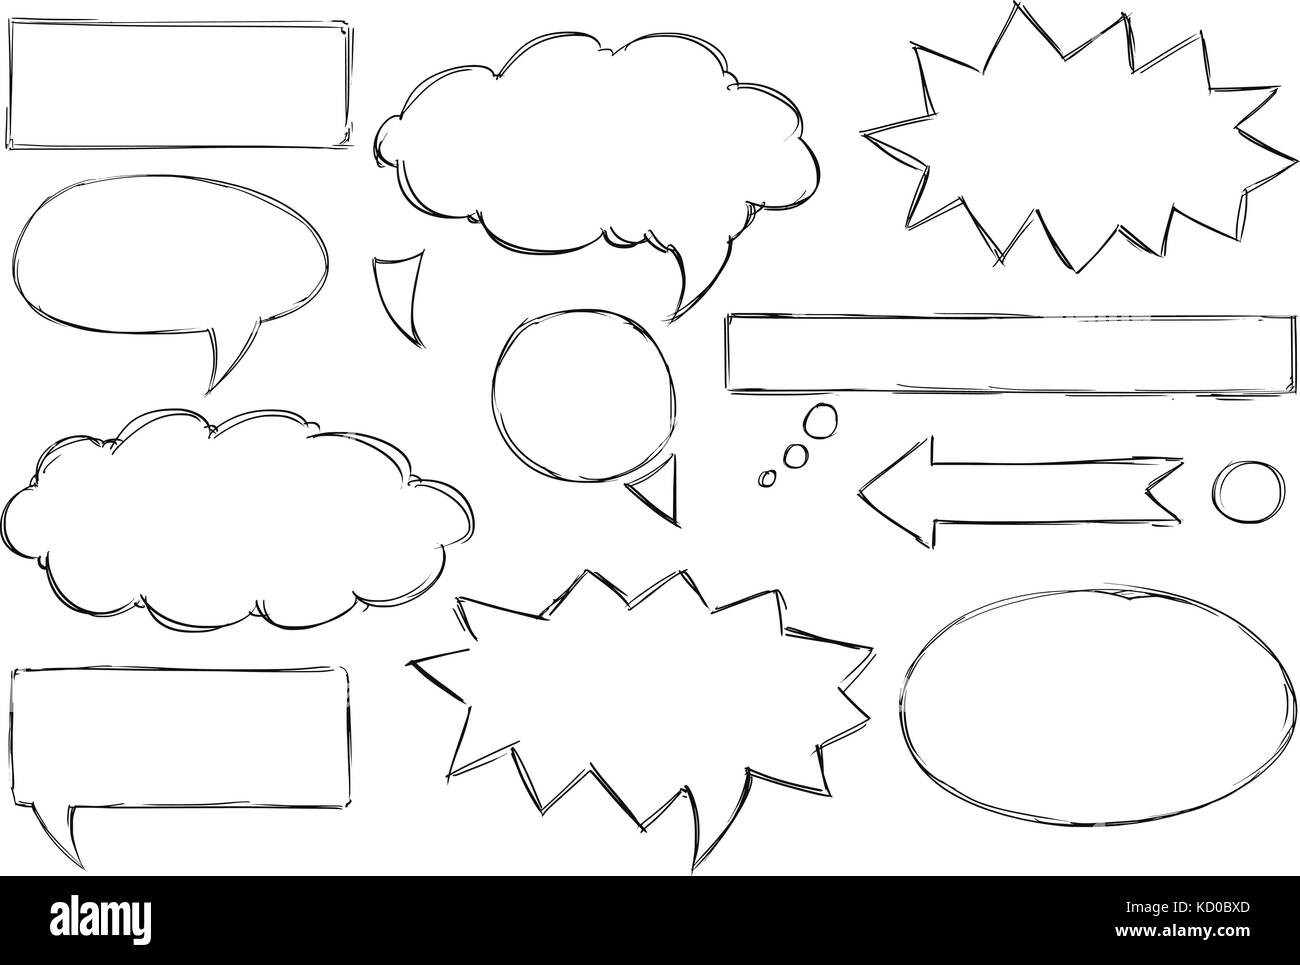 Set of vector doodle hand drawing of text speech bubbles. Stock Vector